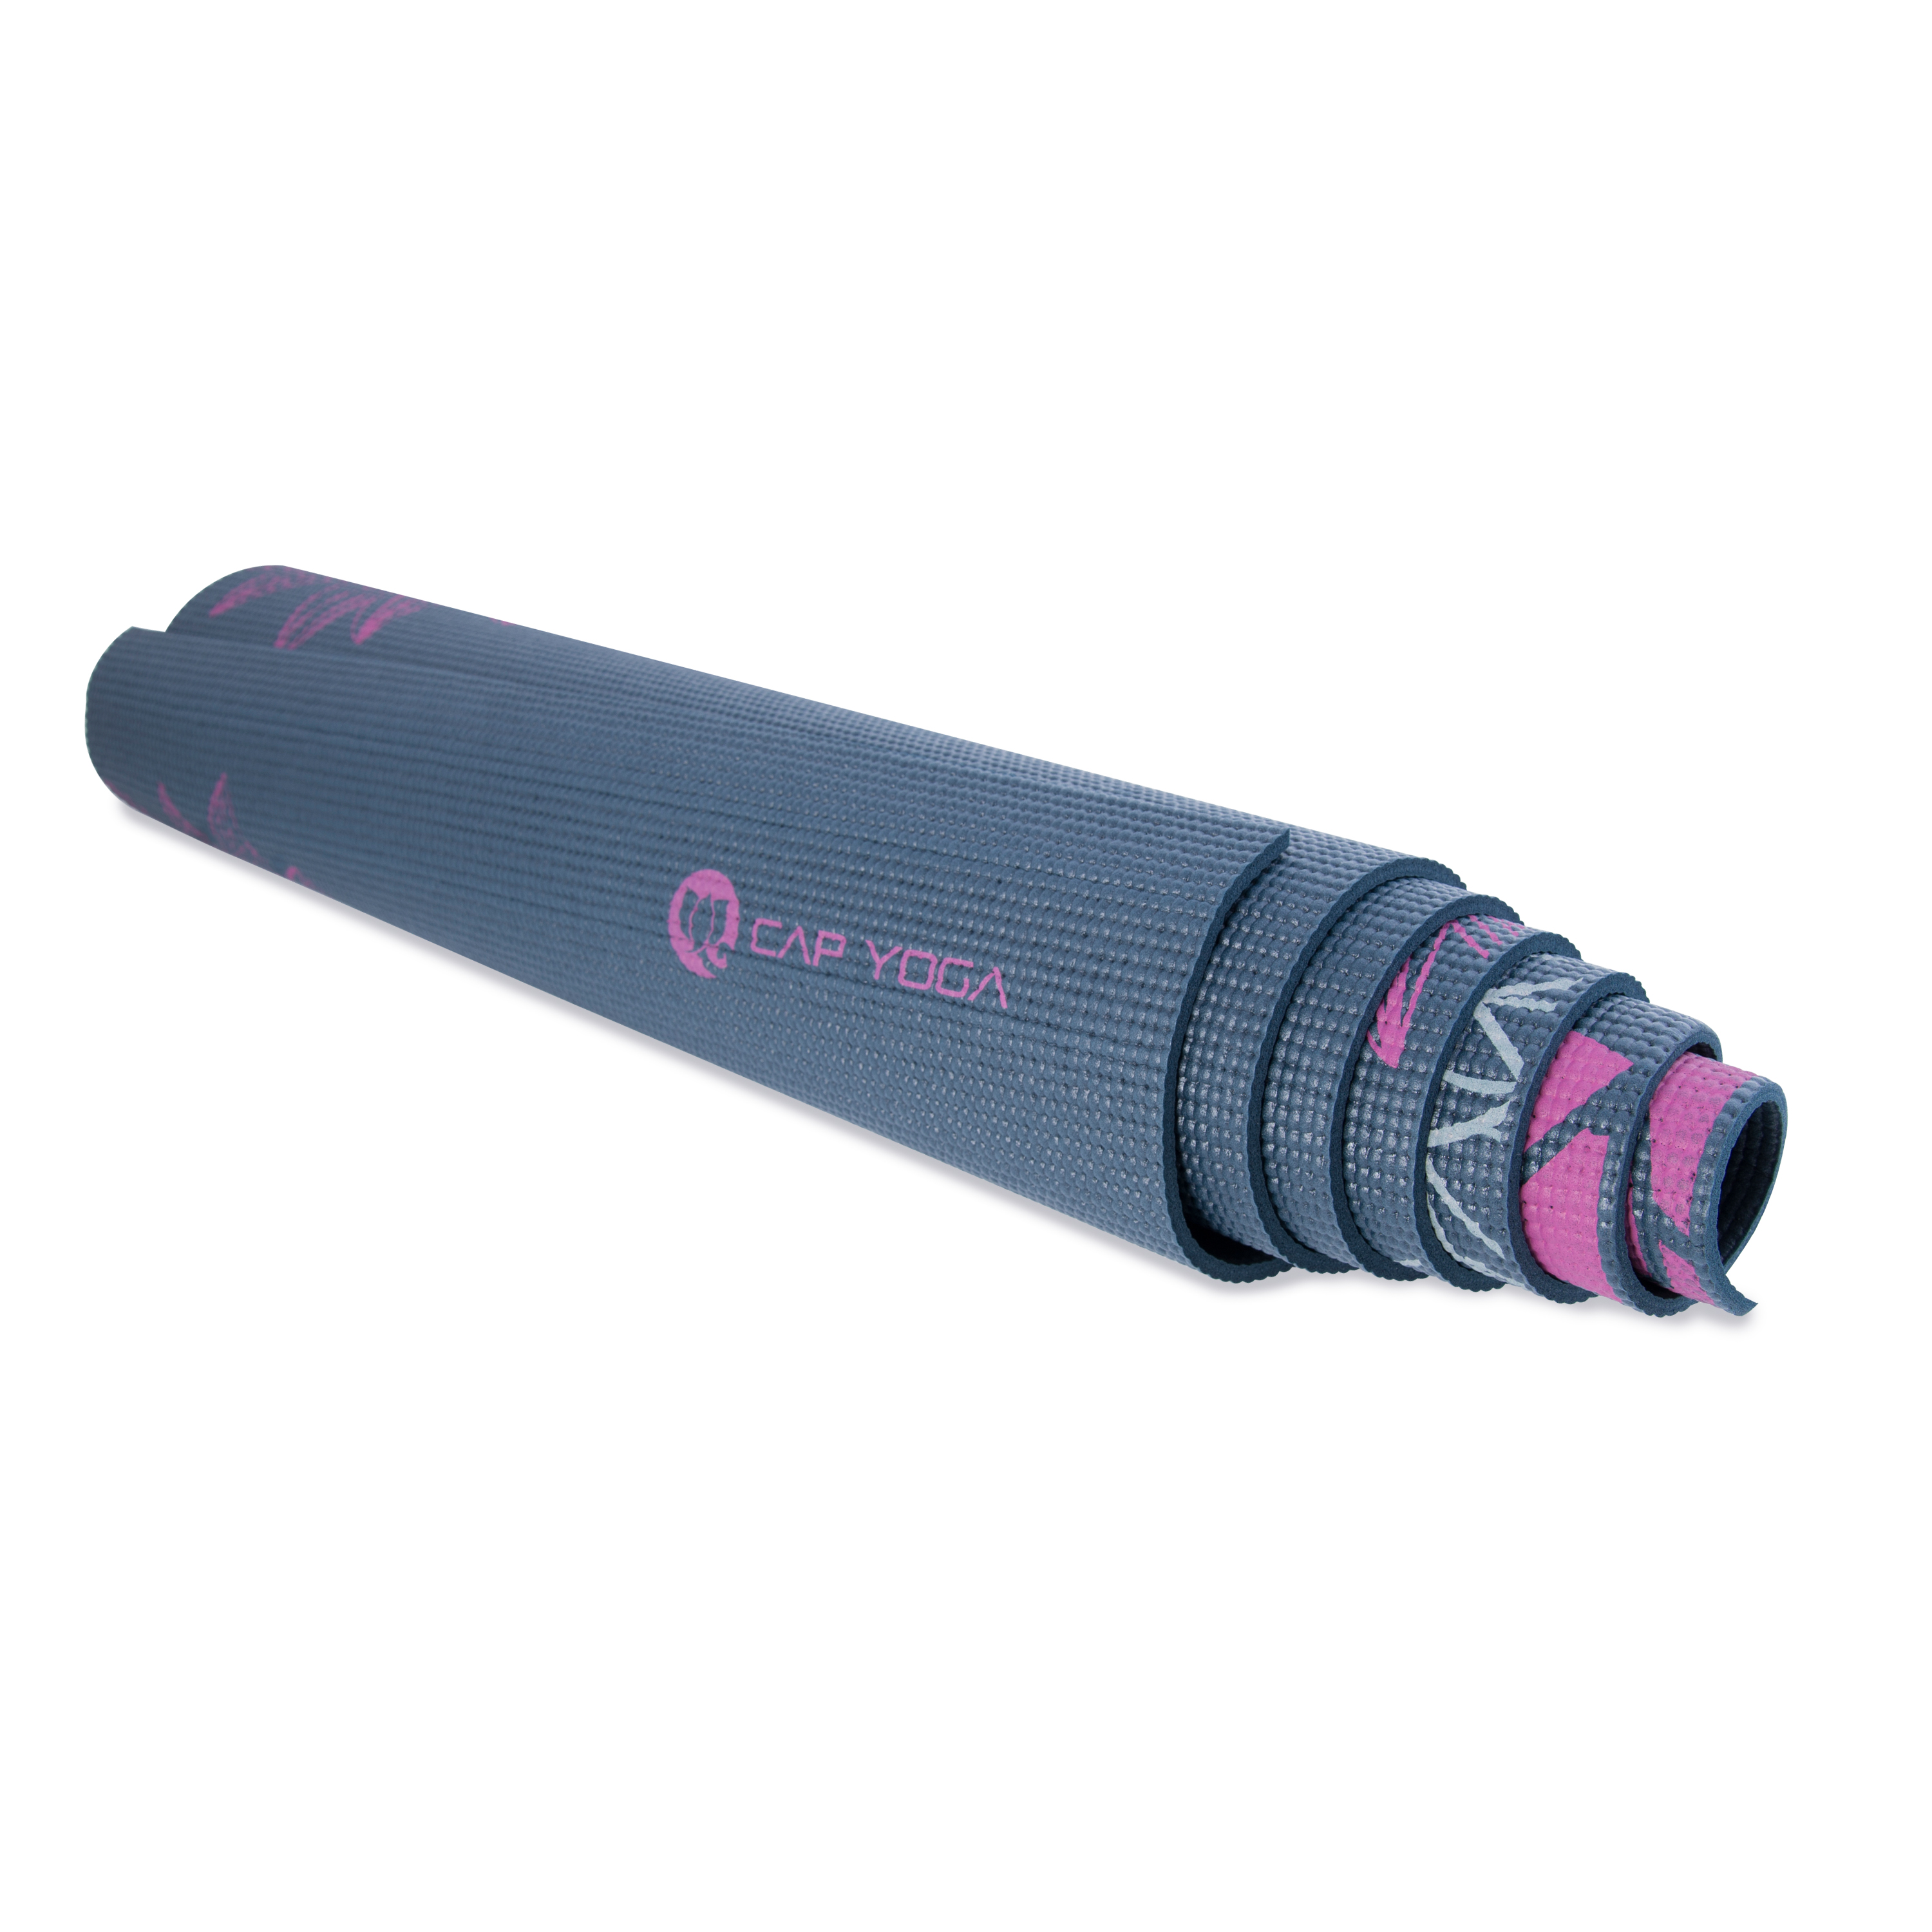 CAP 5mm Yoga Mat with Carry Strap, Dahlia - image 4 of 4